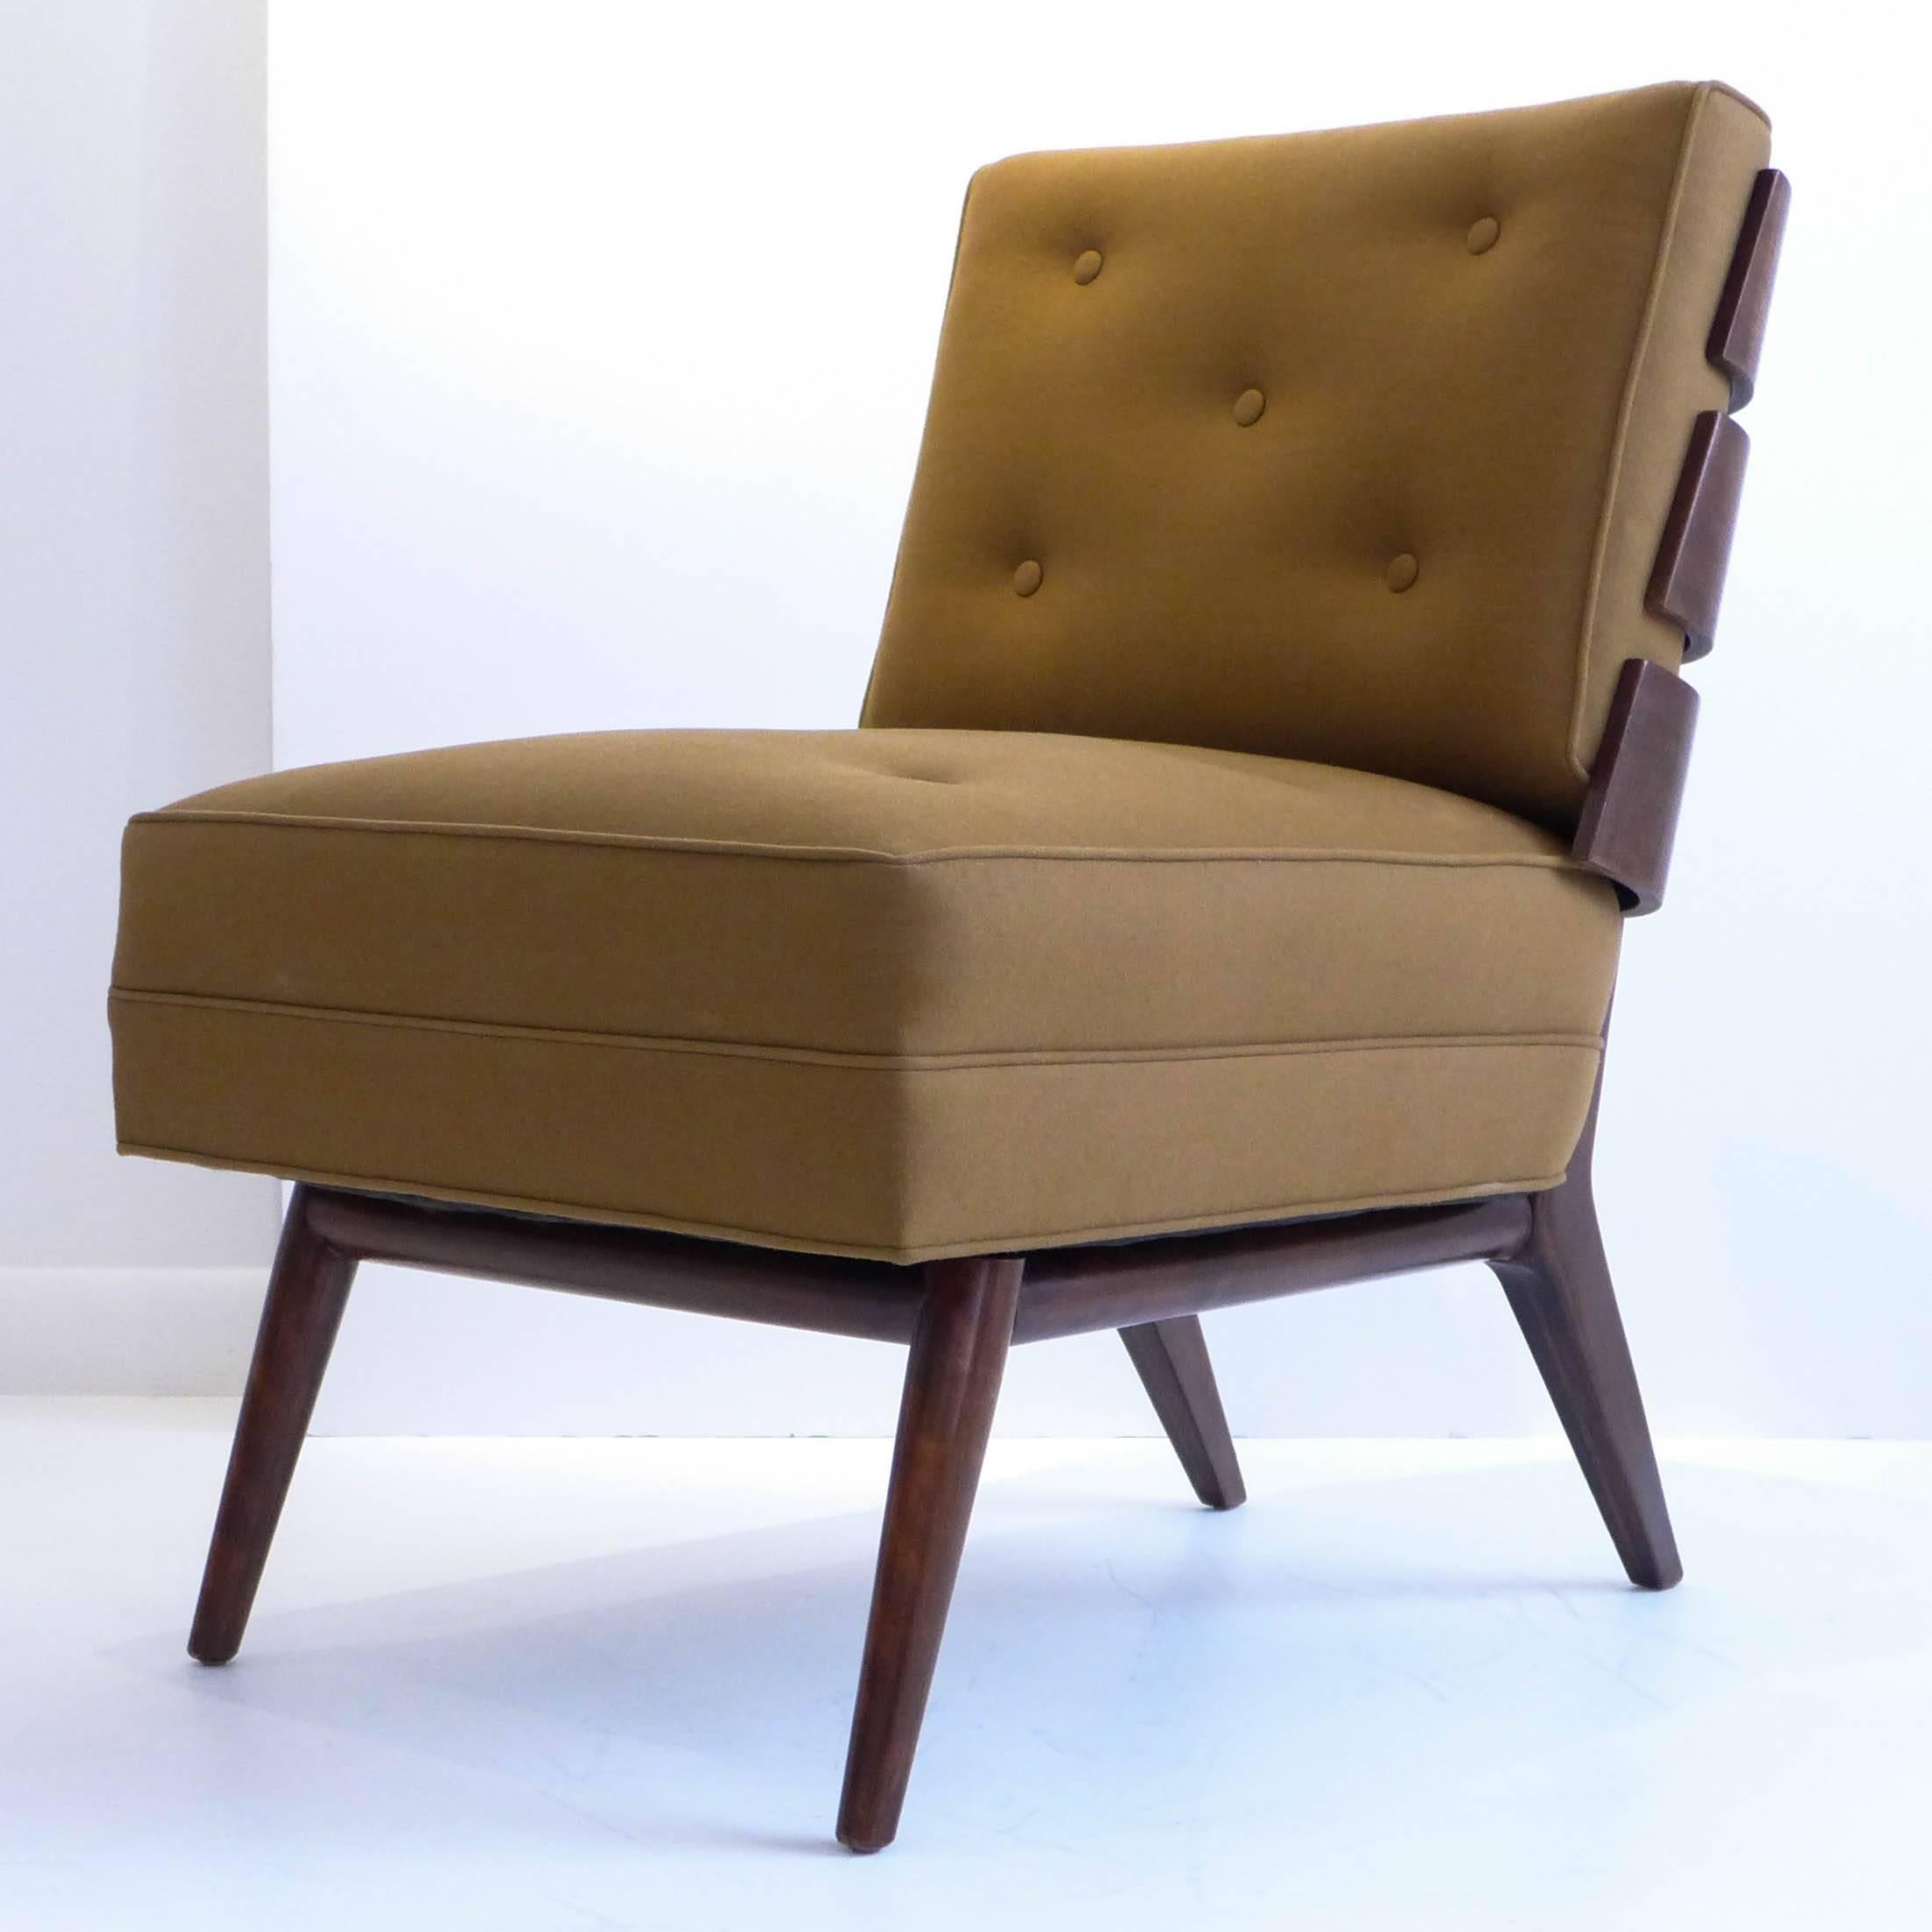 Chic and rare pair of armless lounge chairs in walnut with rakishly angled, steam-bent slat backs, designed by T.H. Robsjohn-Gibbings for Widdicomb Furniture (model #1712), produced circa 1954. Frames refinished; seat and loose back bolster